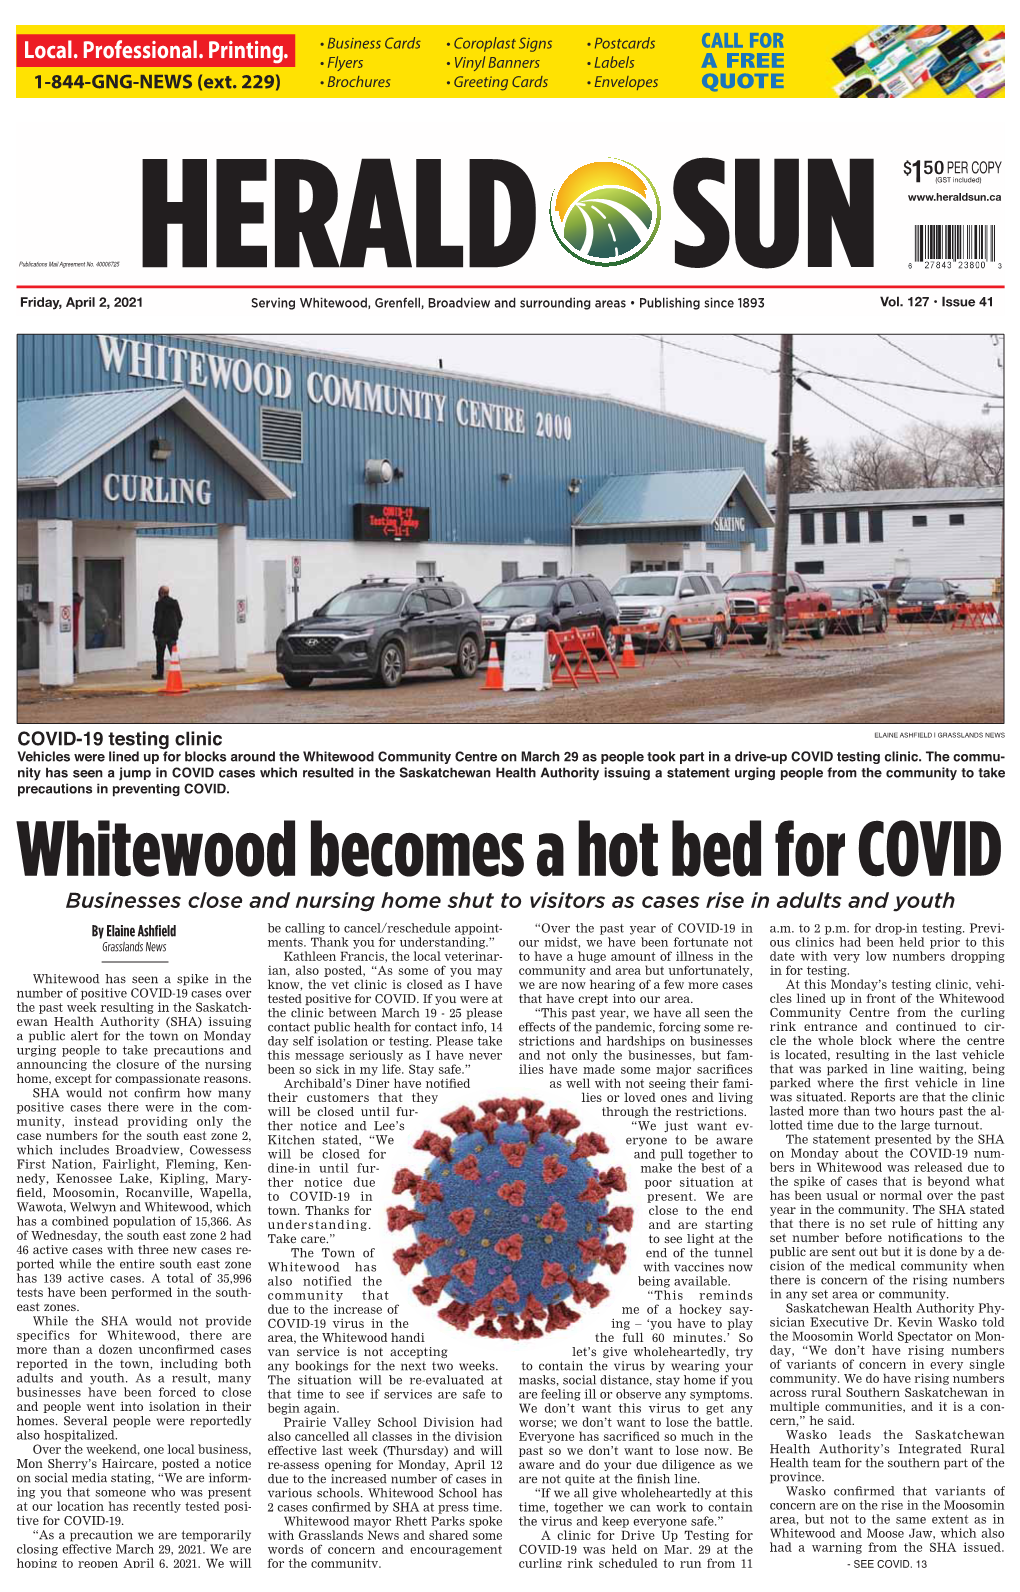 Whitewood Becomes a Hot Bed for COVID